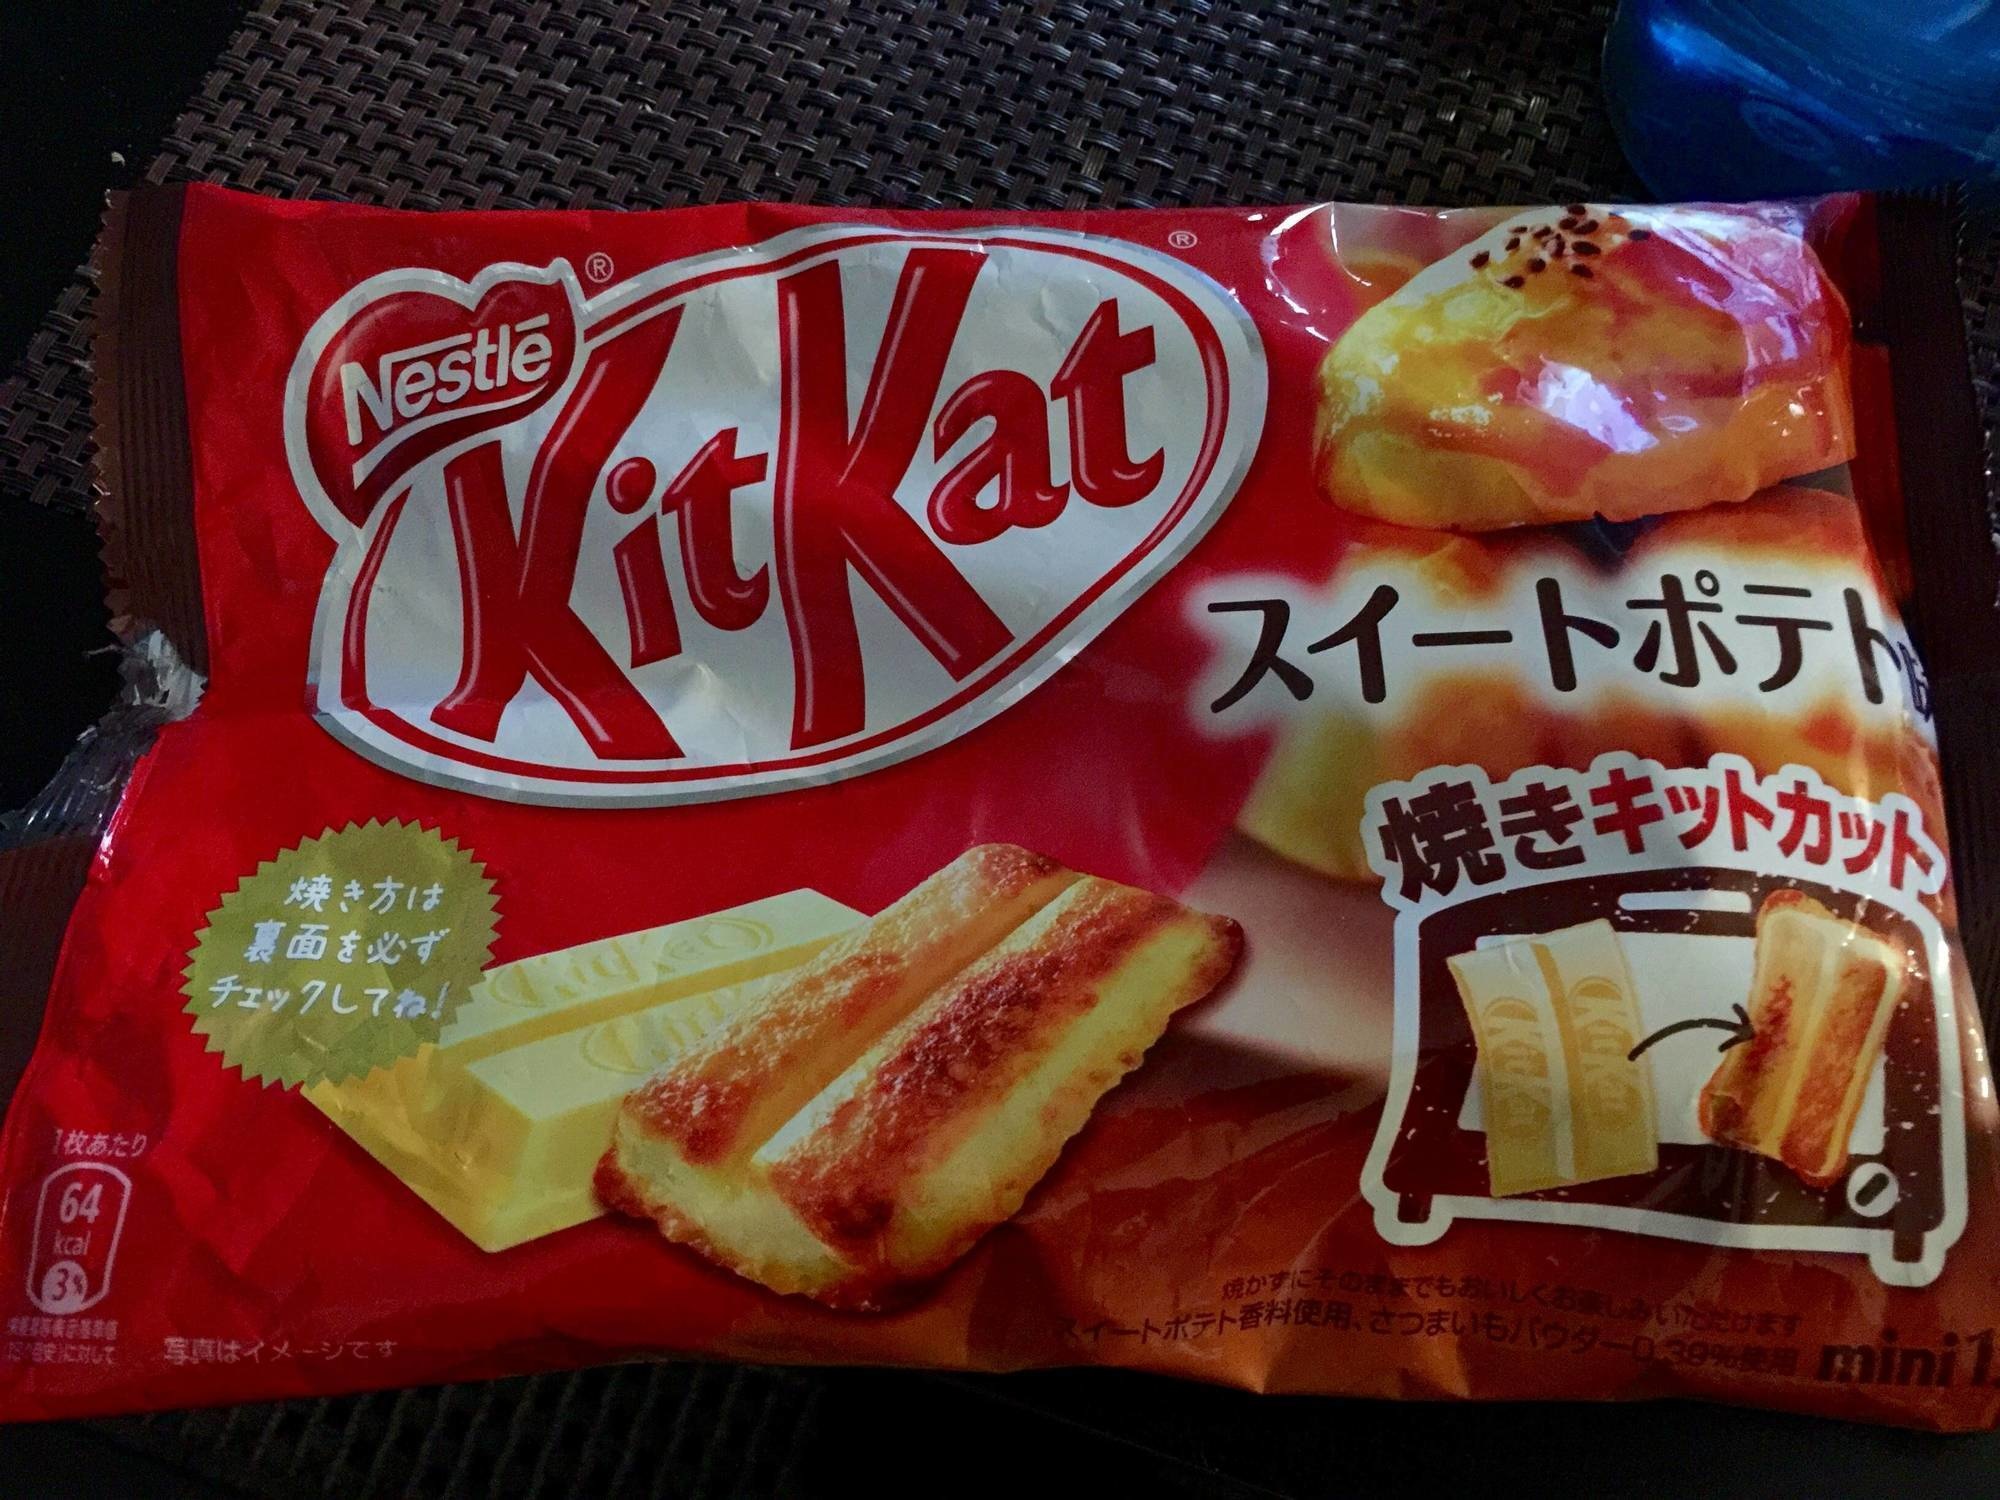 A packet of Japanese Kit-Kats that are meant to be baked.